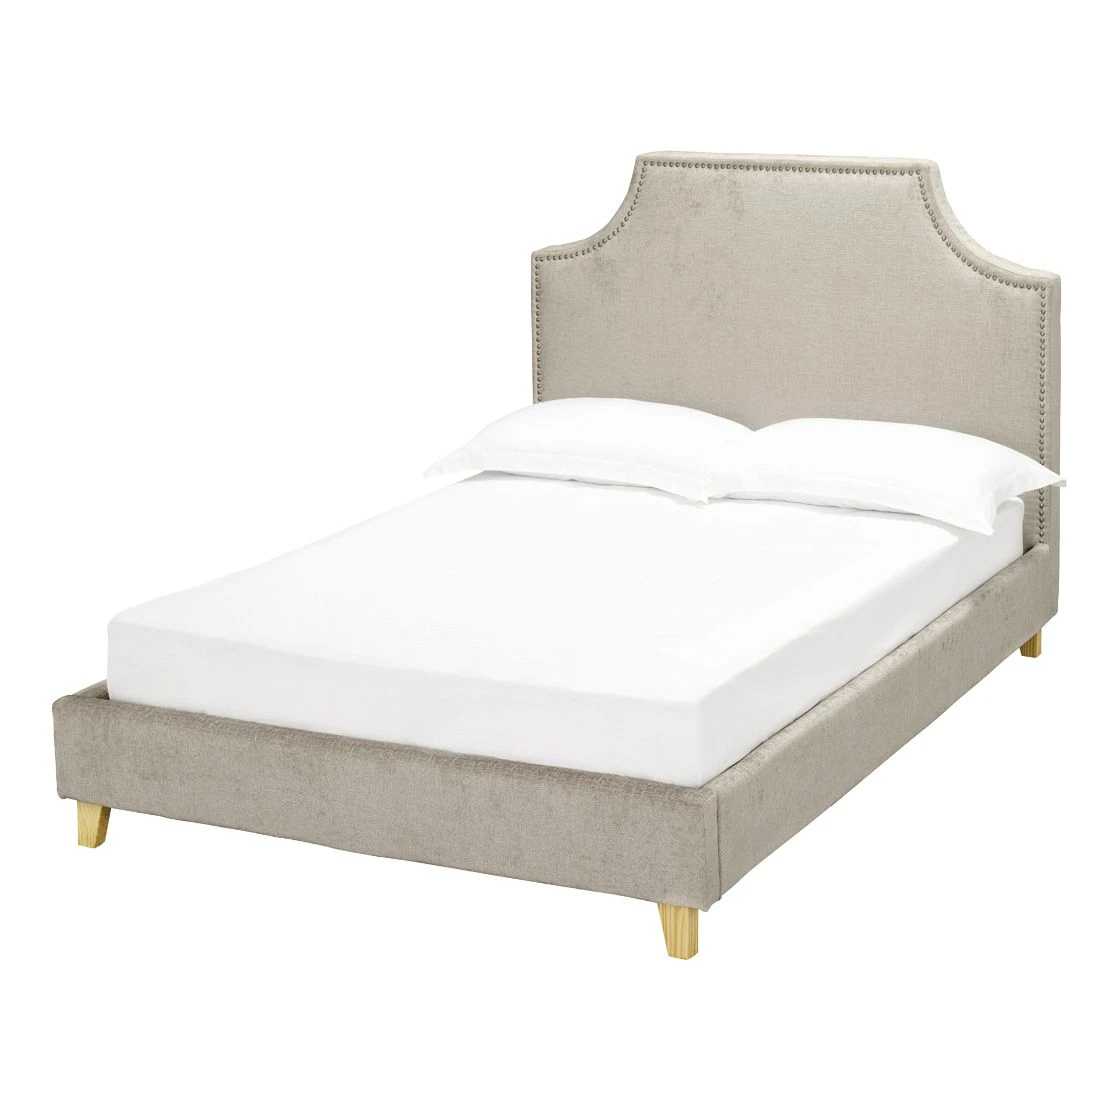 Comfort bedroom furniture modern beds double bed modern fabric soft bed frame queen king size